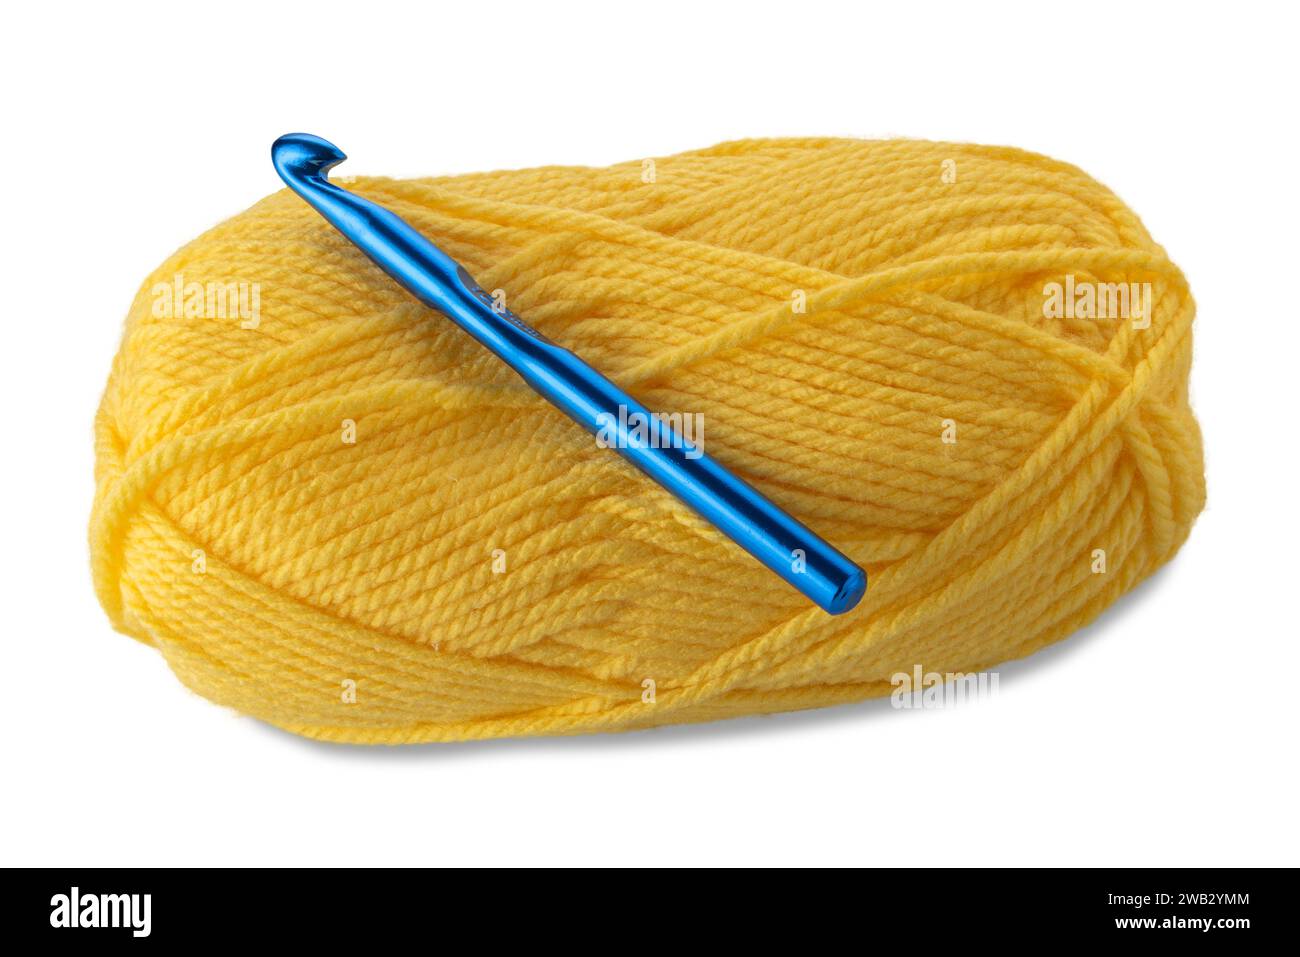 Ball of yellow-colored wool yarn with knitting weaving crochet hook 10 mm blue color isolated on white with clipping path included Stock Photo